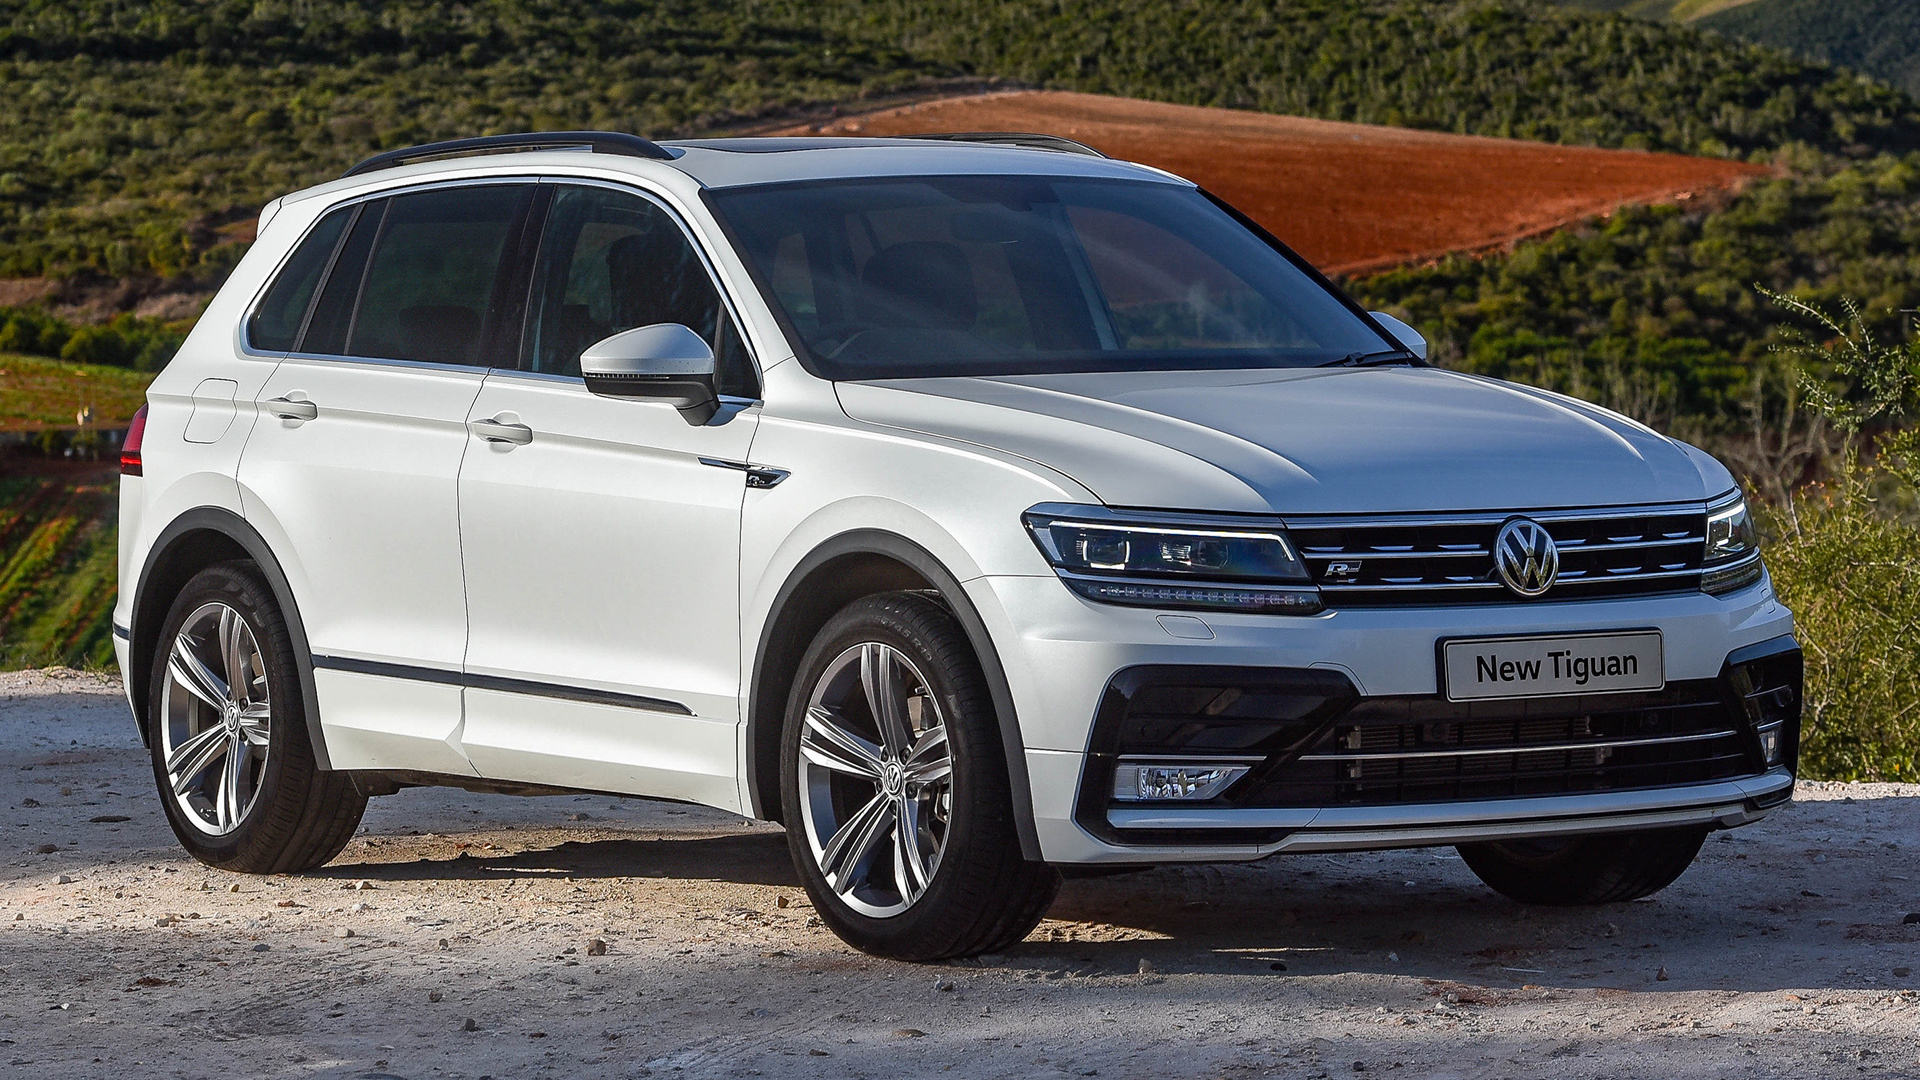 Download Volkswagen Tiguan Ehybrid R Line wallpapers for mobile phone  free Volkswagen Tiguan Ehybrid R Line HD pictures